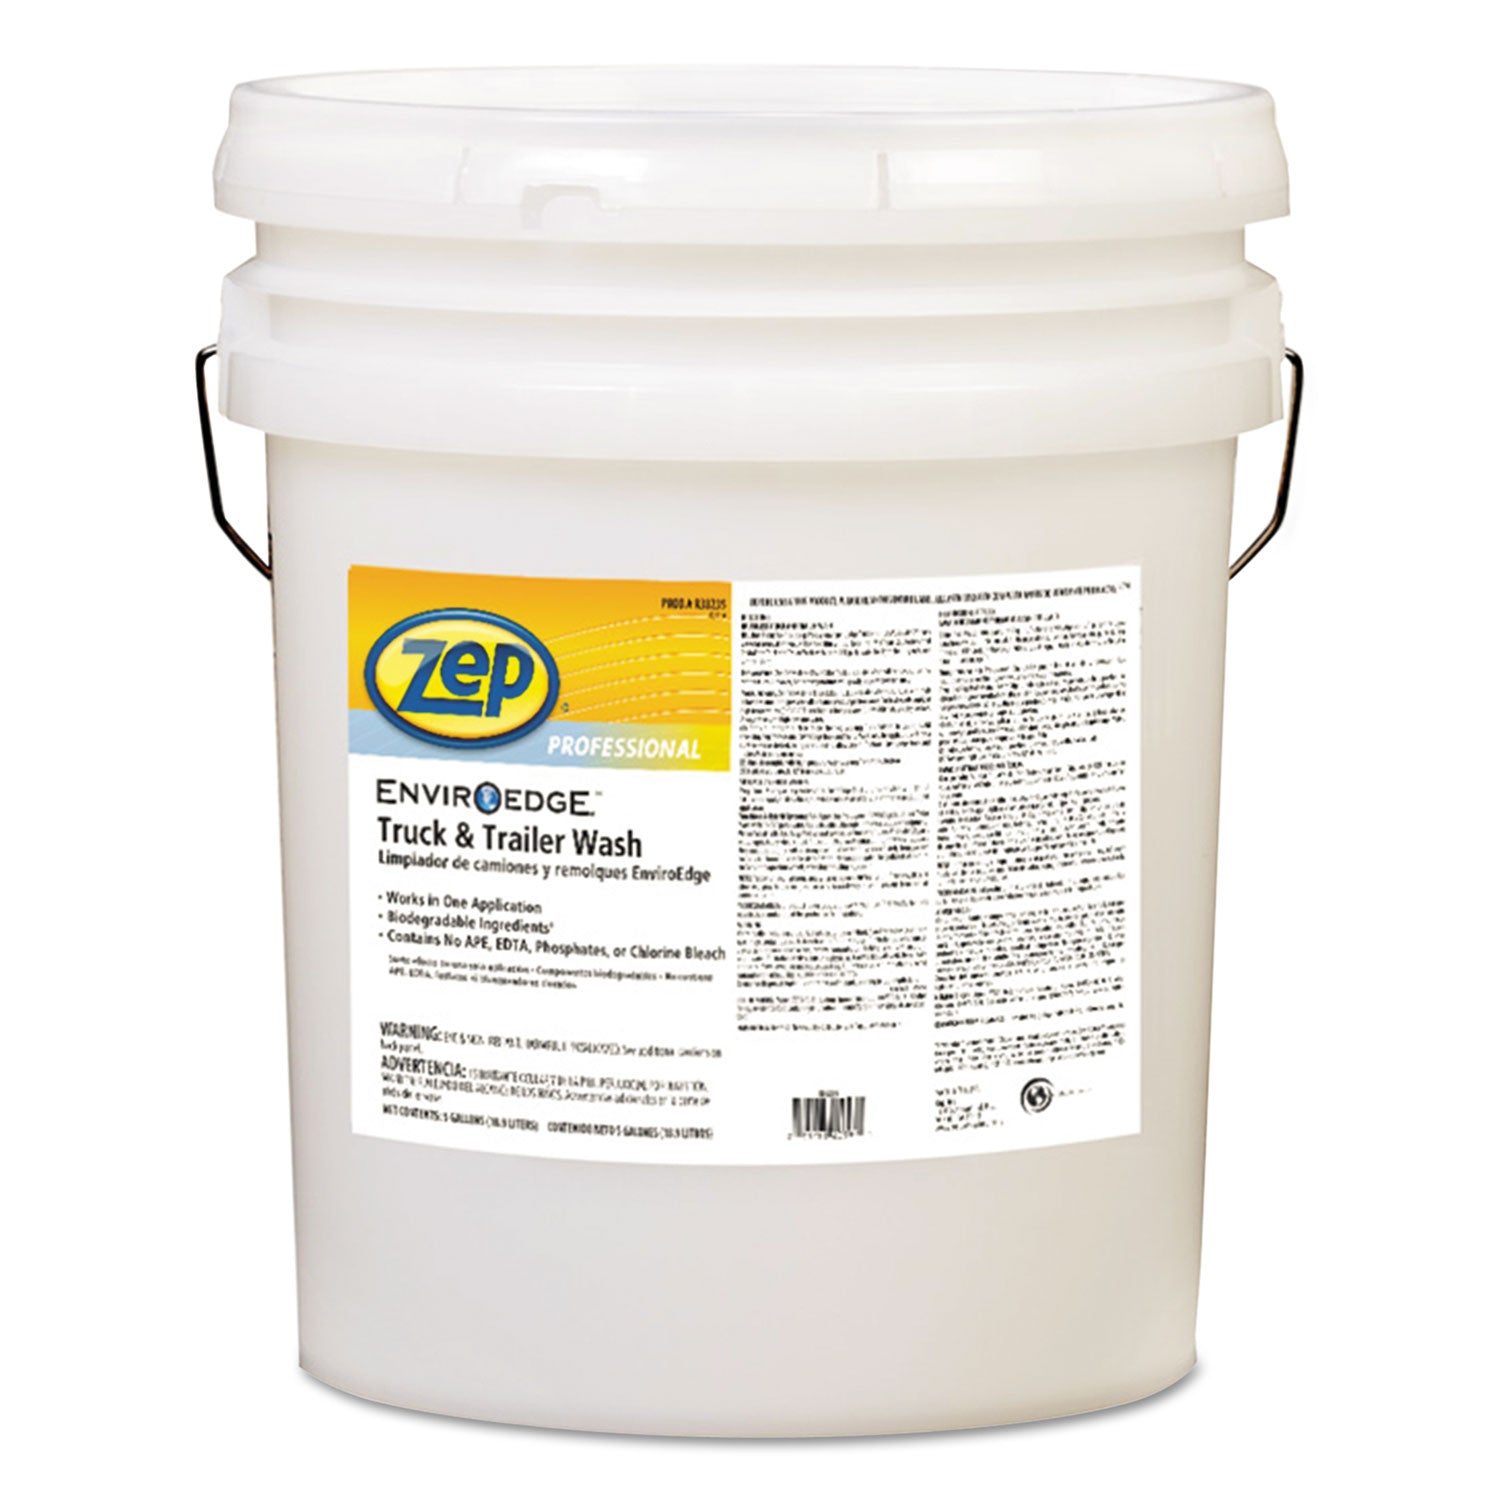 enviroedge-truck-and-trailer-wash-5-gal-pail_zpe1047673 - 1